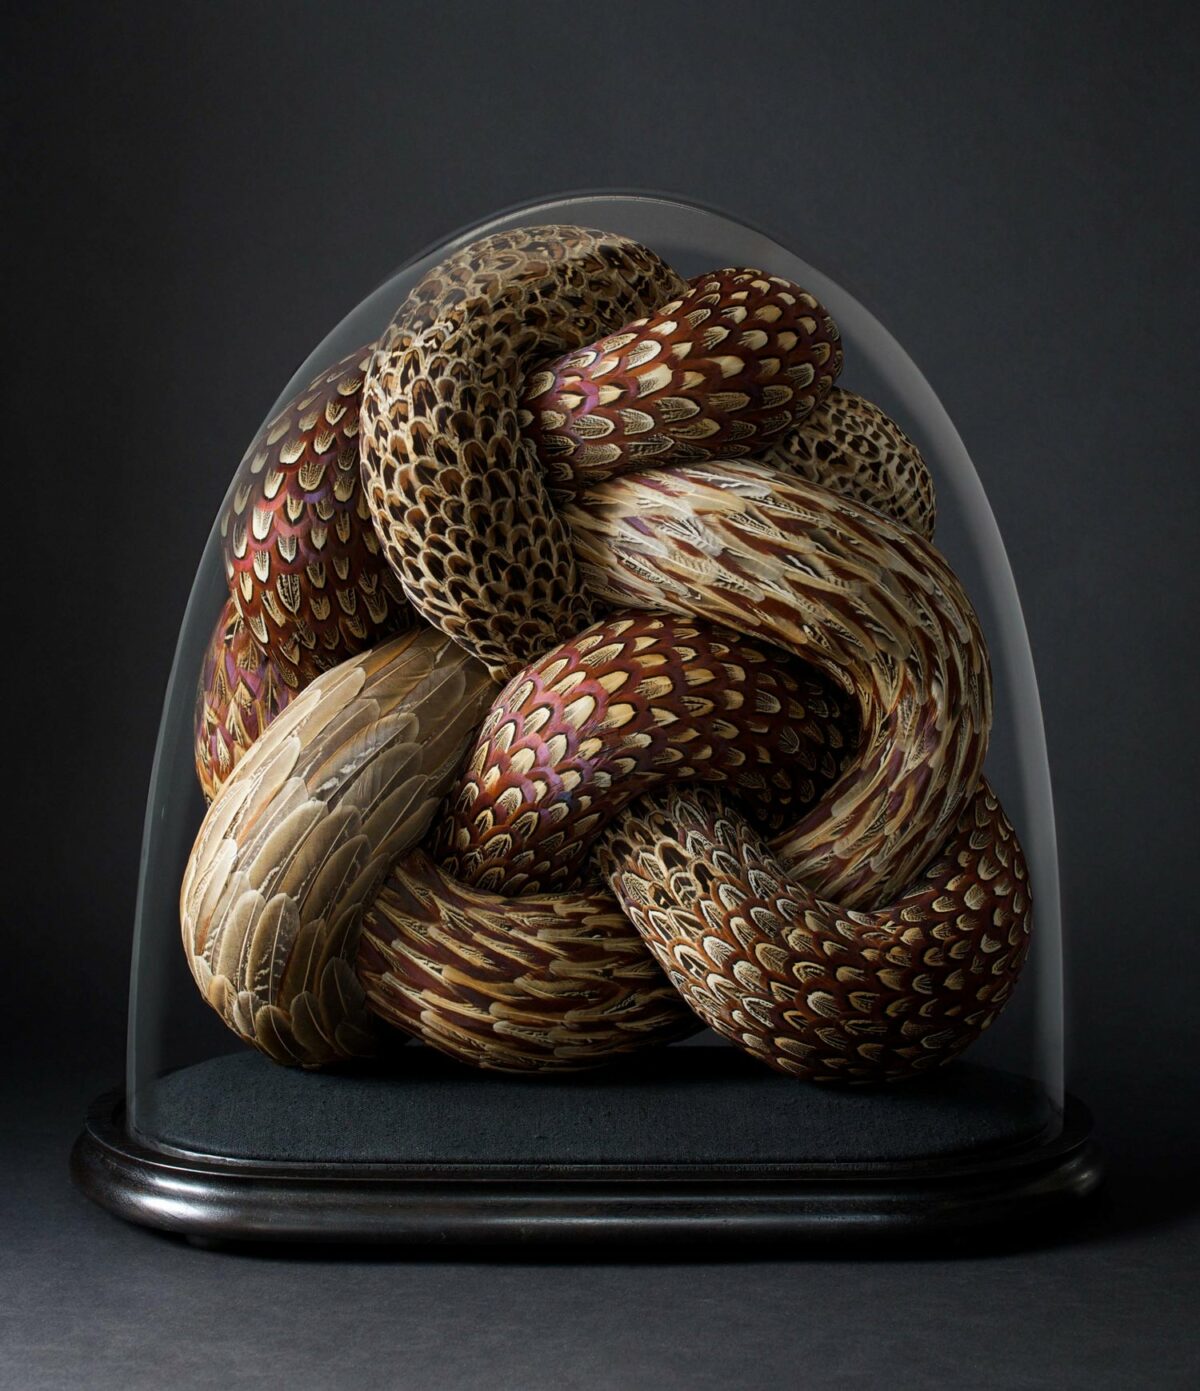 Absolutely Stunning Serpentine Coiled Sculptures Made Of Found British Bird Feathers By Kate Mccgwire 5